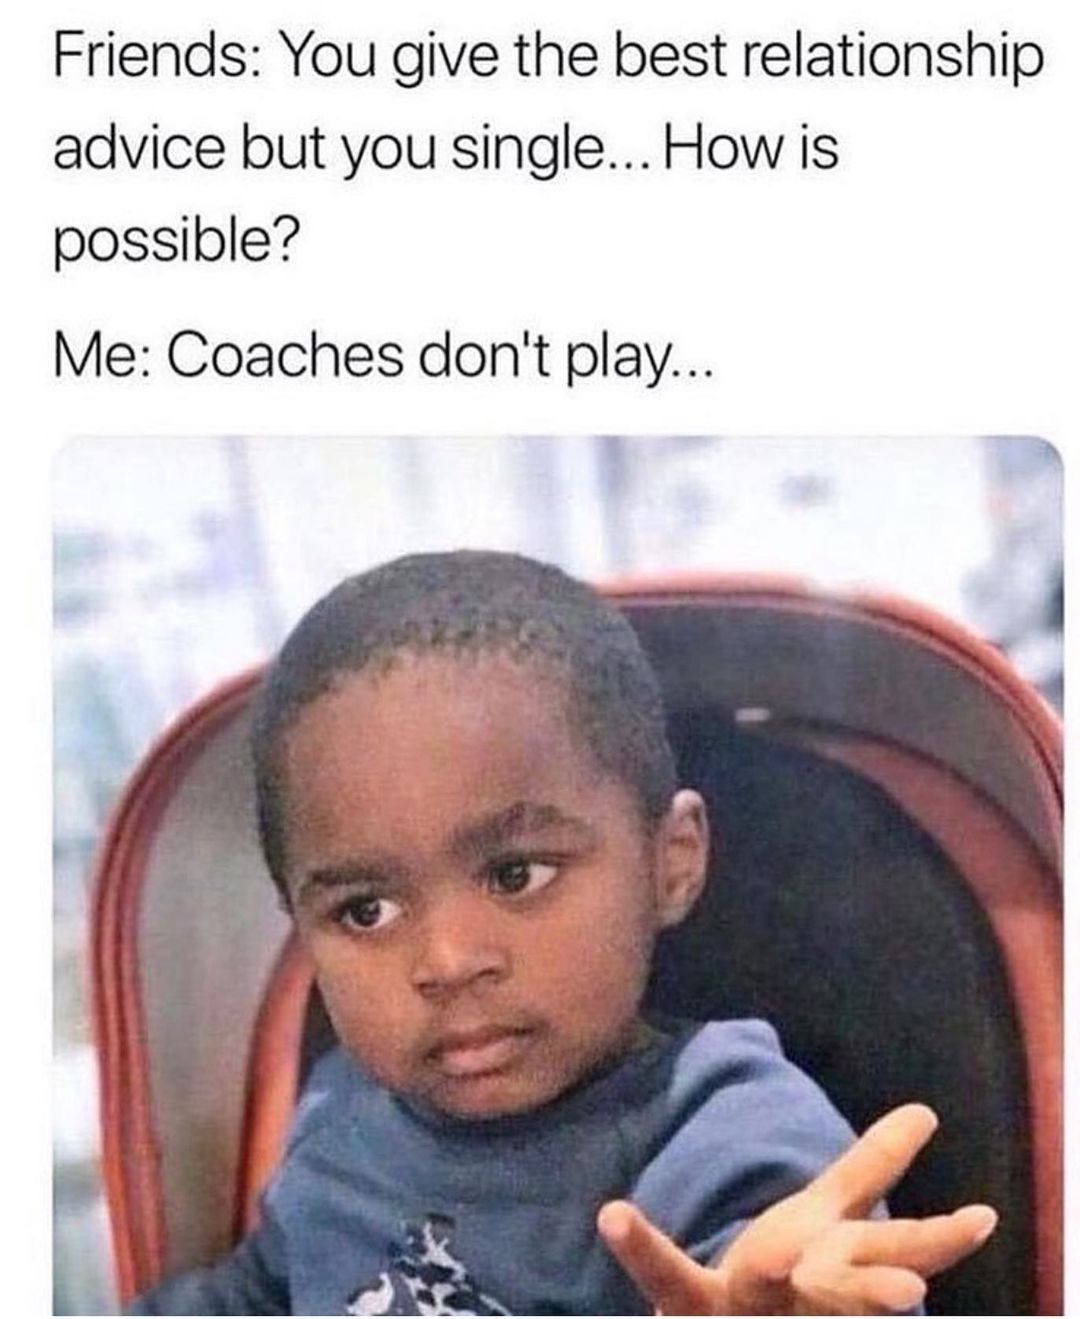 Friends: You give the best relationship advice but you single... How is possible?  Me: Coaches don't play...